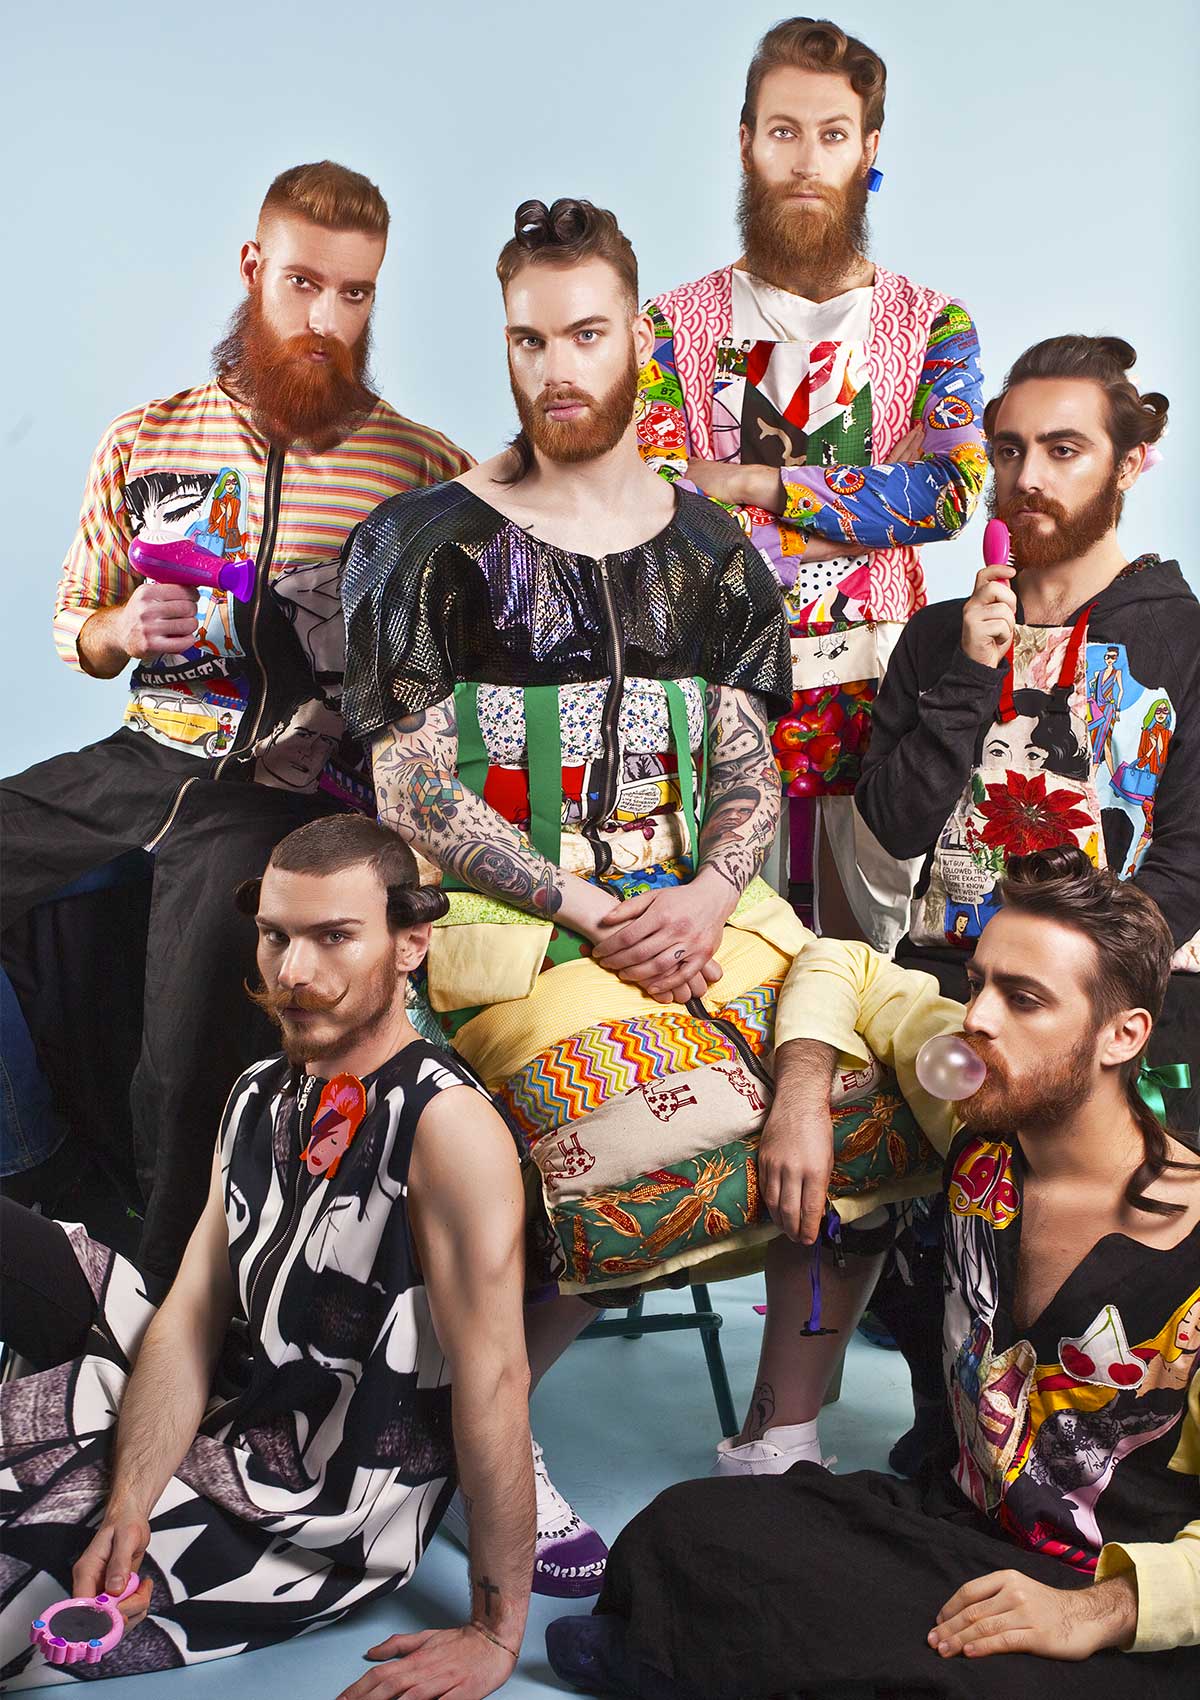 barbe-culture-hipster-poupees-mattel